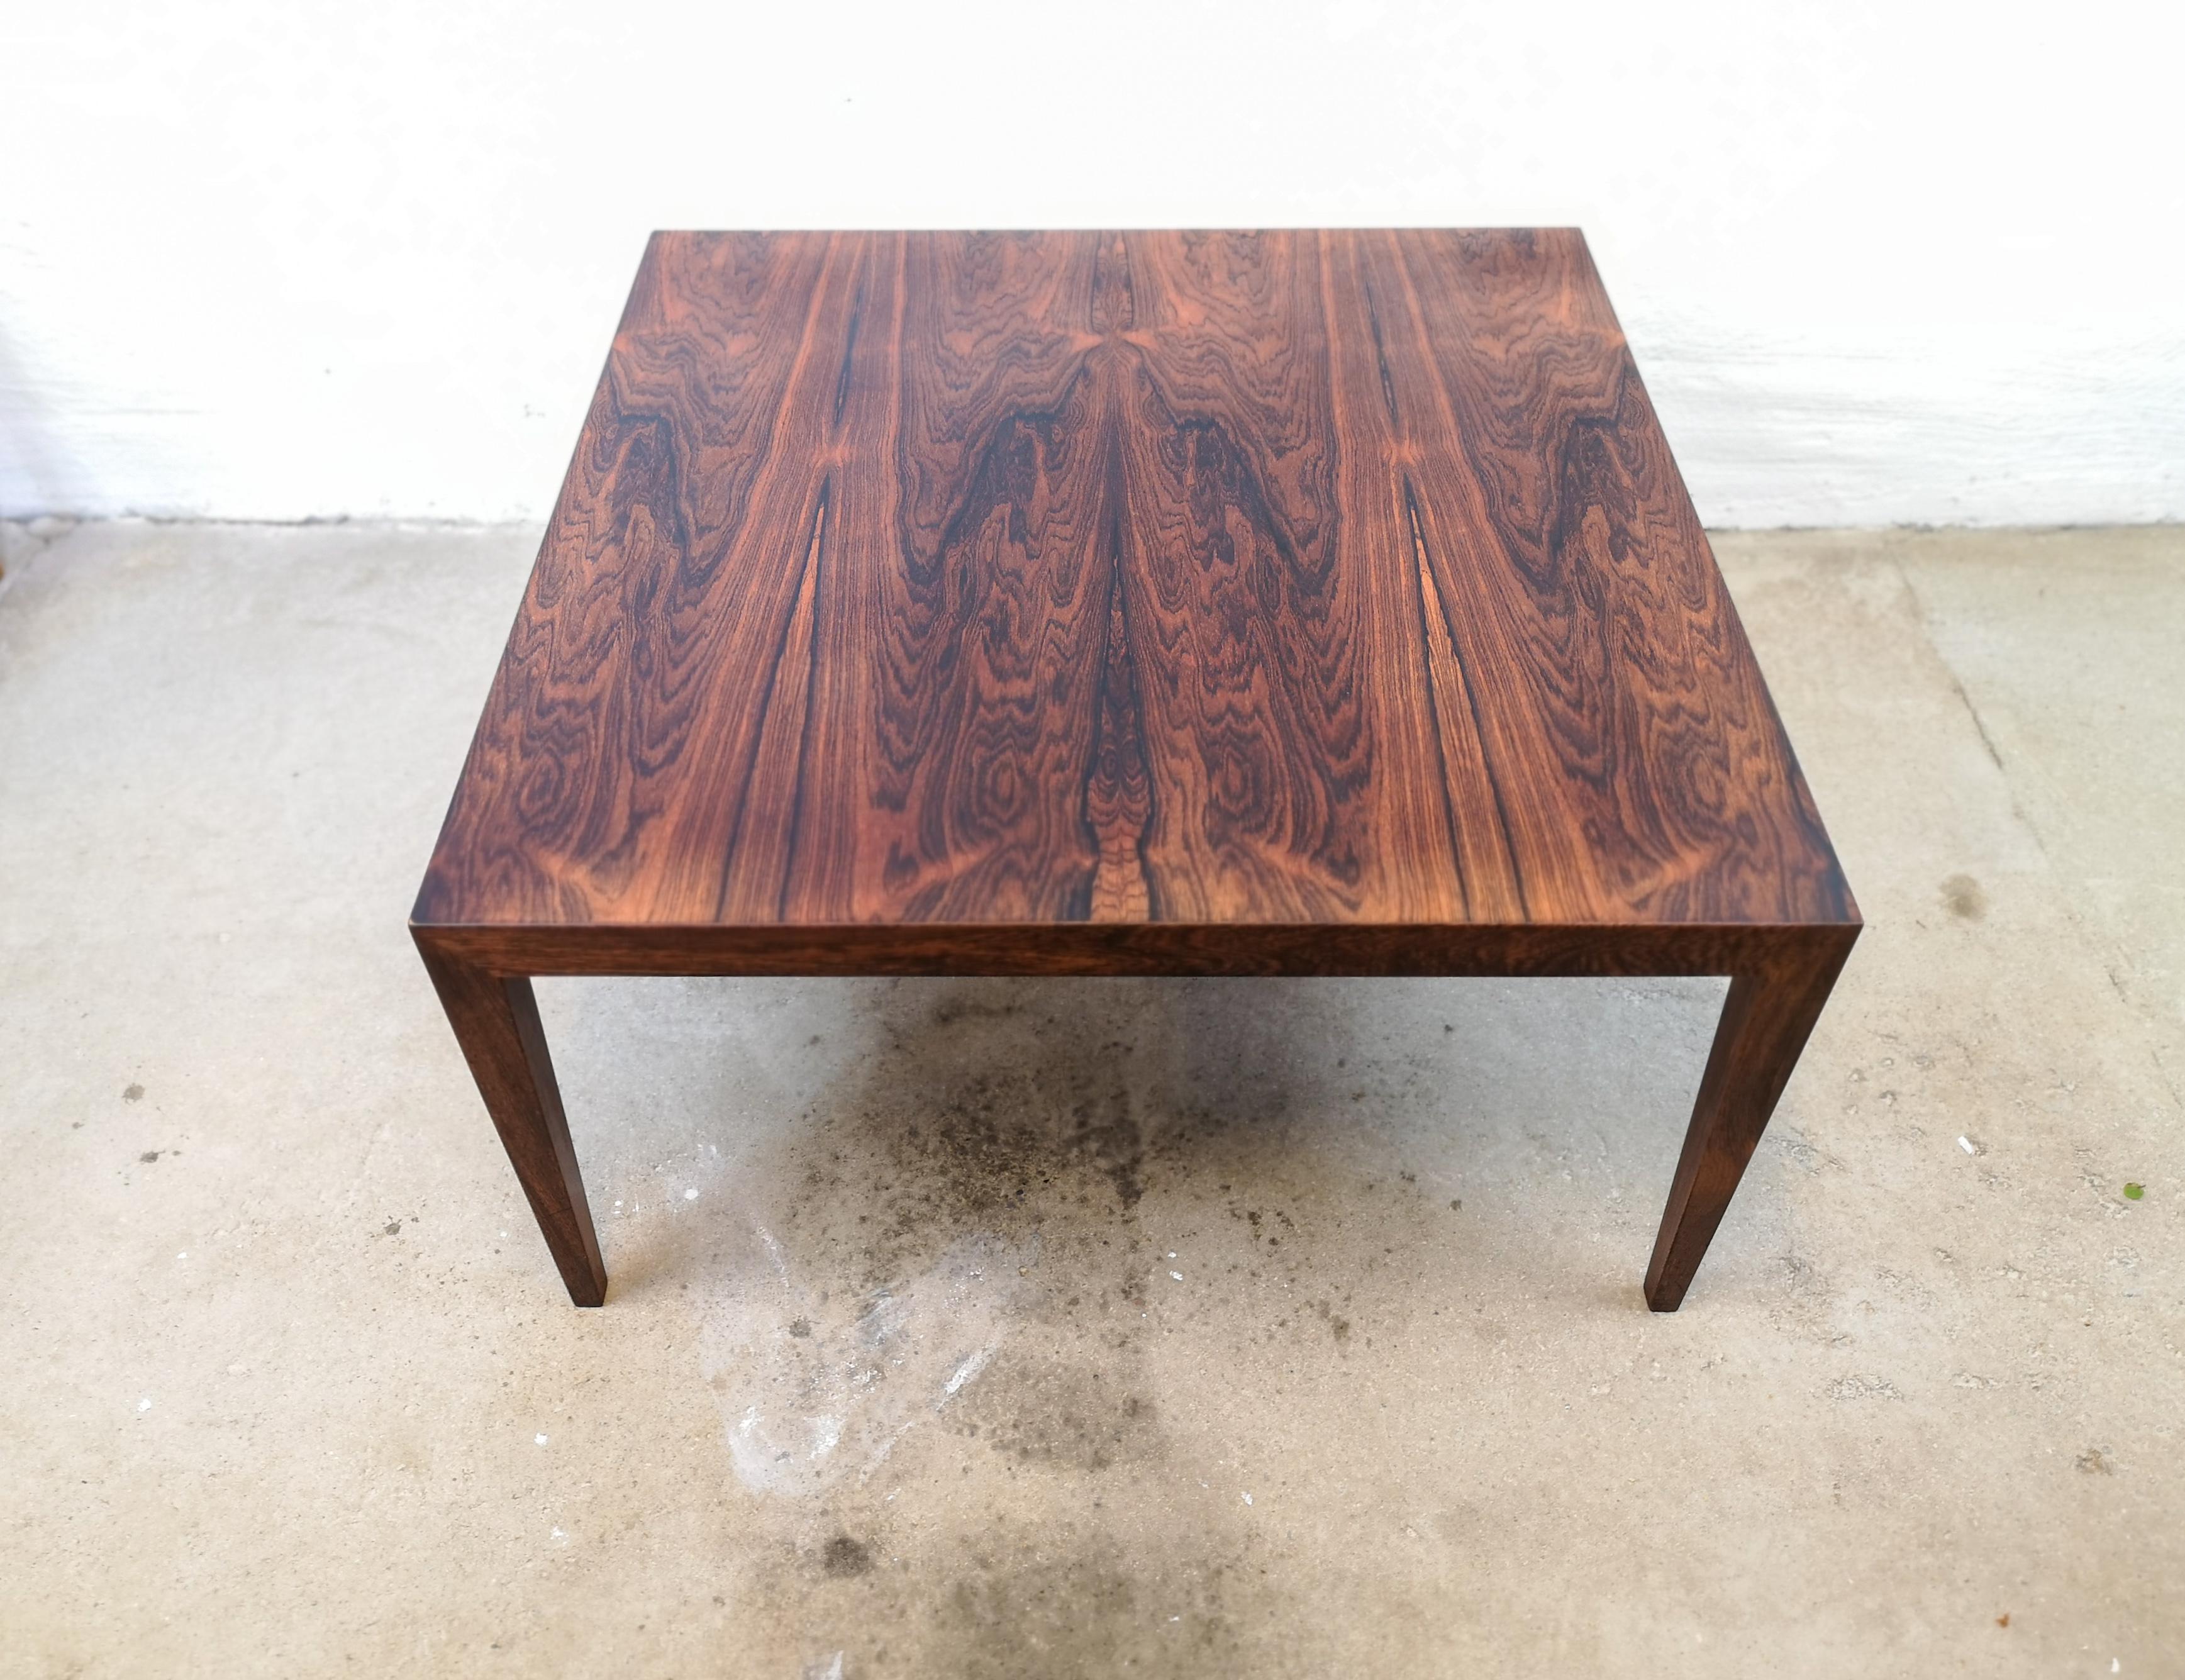 This stunning coffee table was produced in Denmark at Haslev Mobelsnedkeri. Its designed by Severin Hansen. His designed is easily recognized if you look at where the legs meet the top. Perfectly match they are and makes the table look like a piece